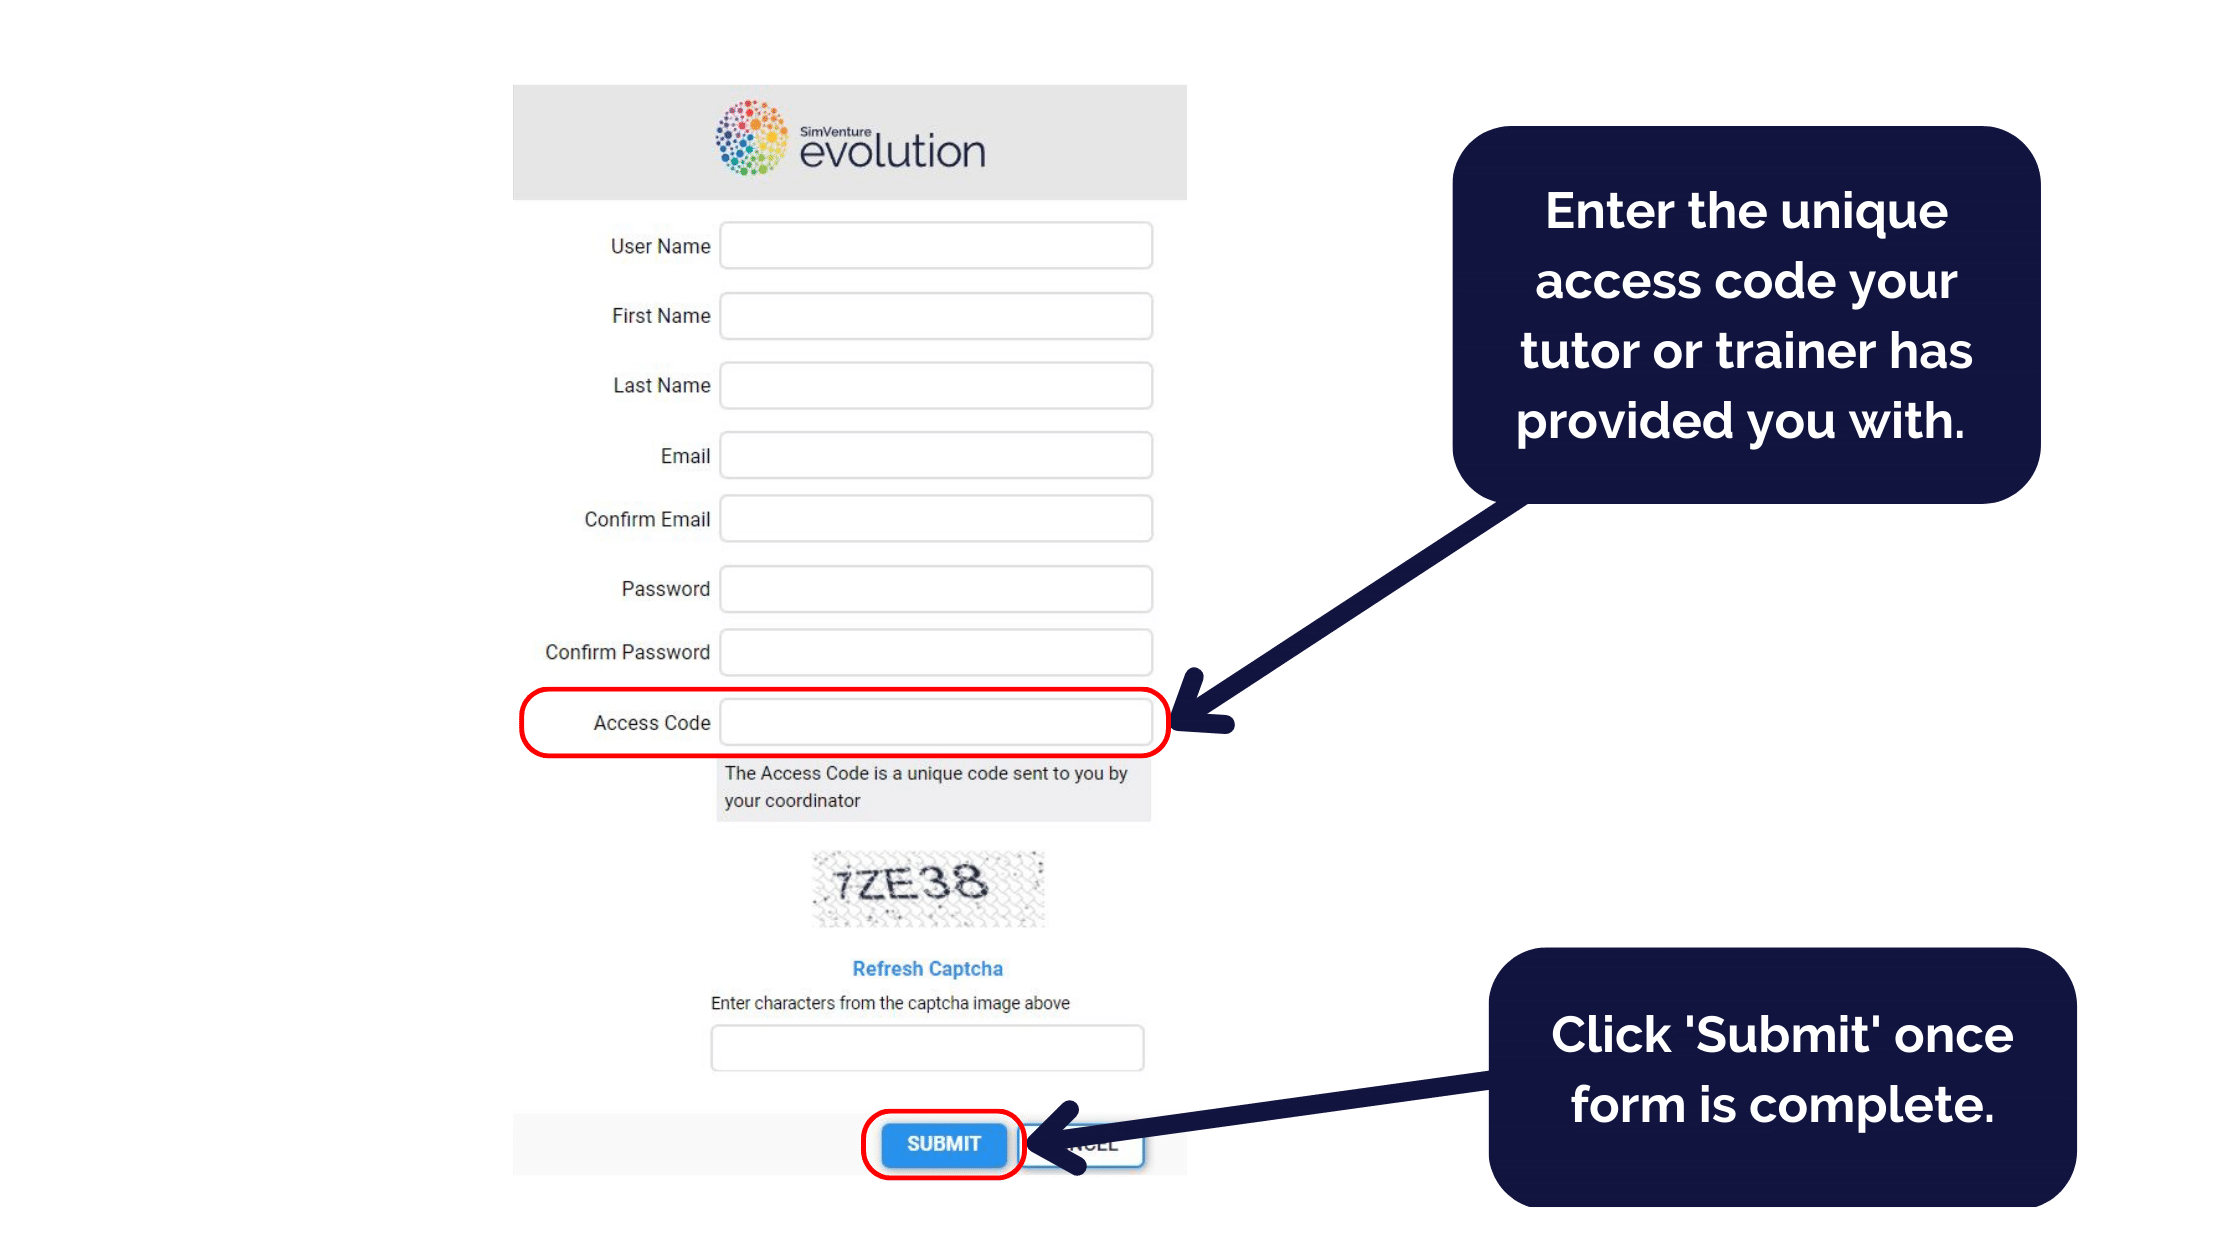 Complete the form to create your SimVenture Evolution account